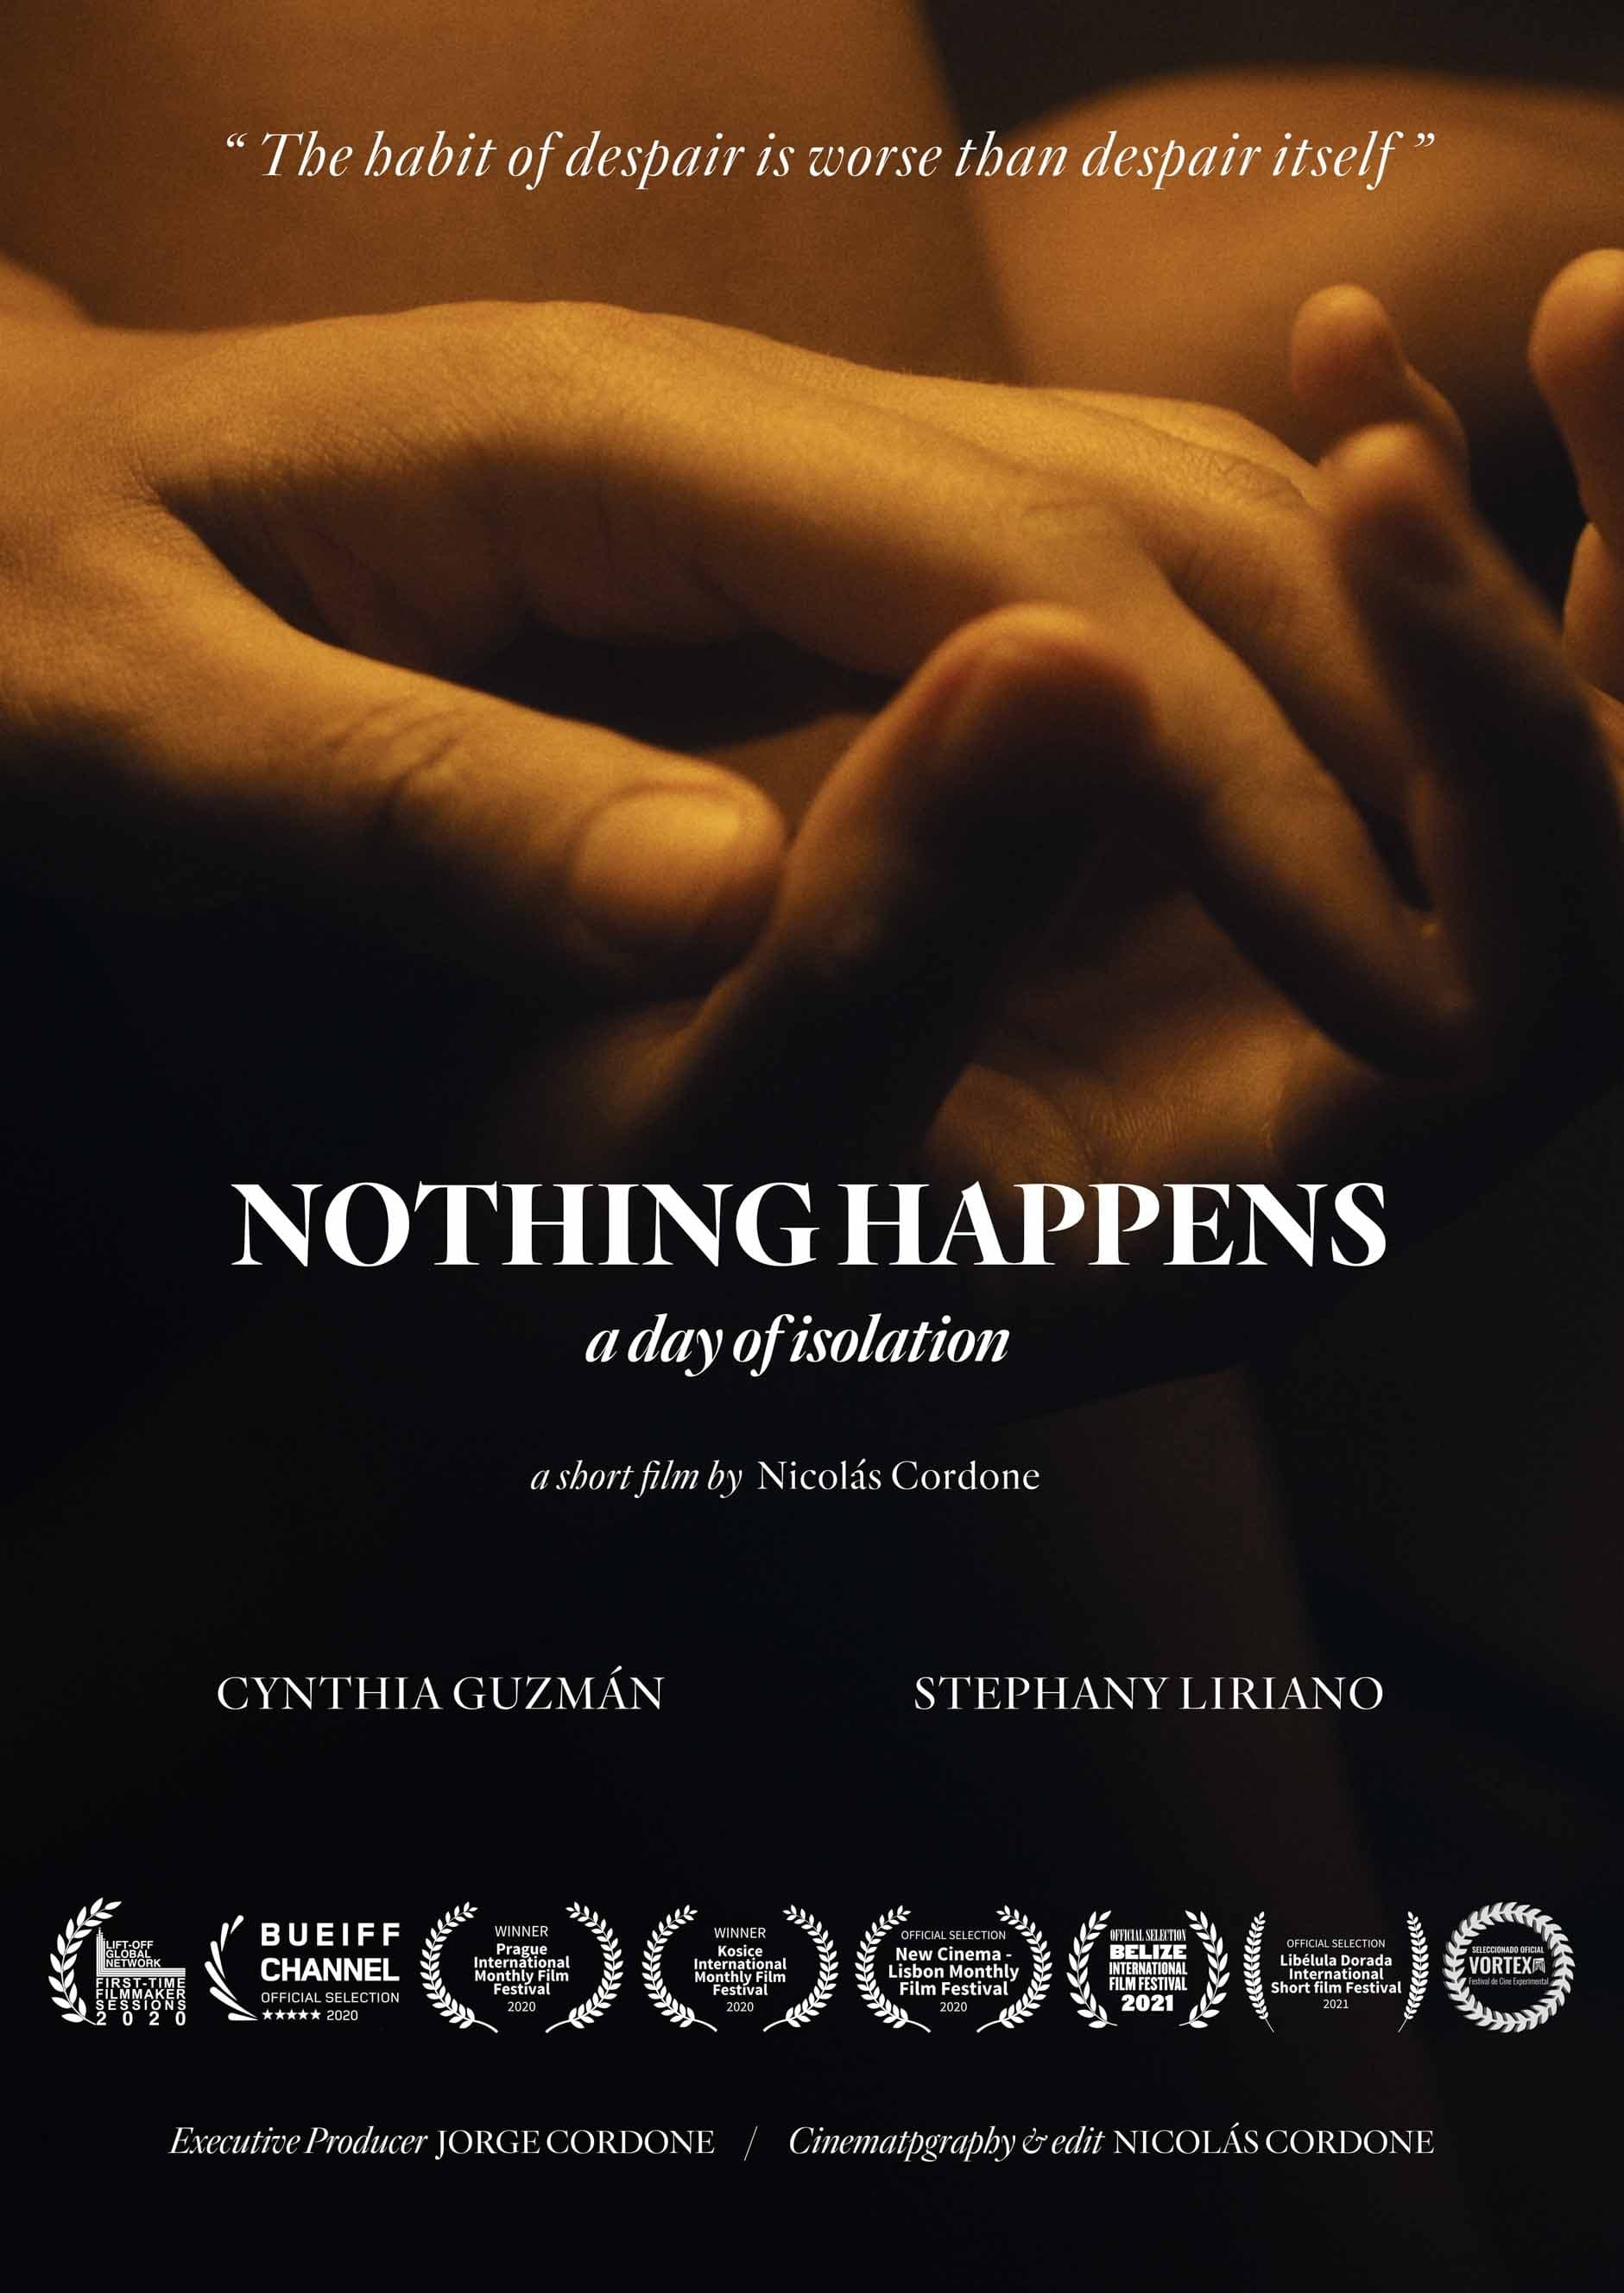 Nothing Happens, a day of isolation